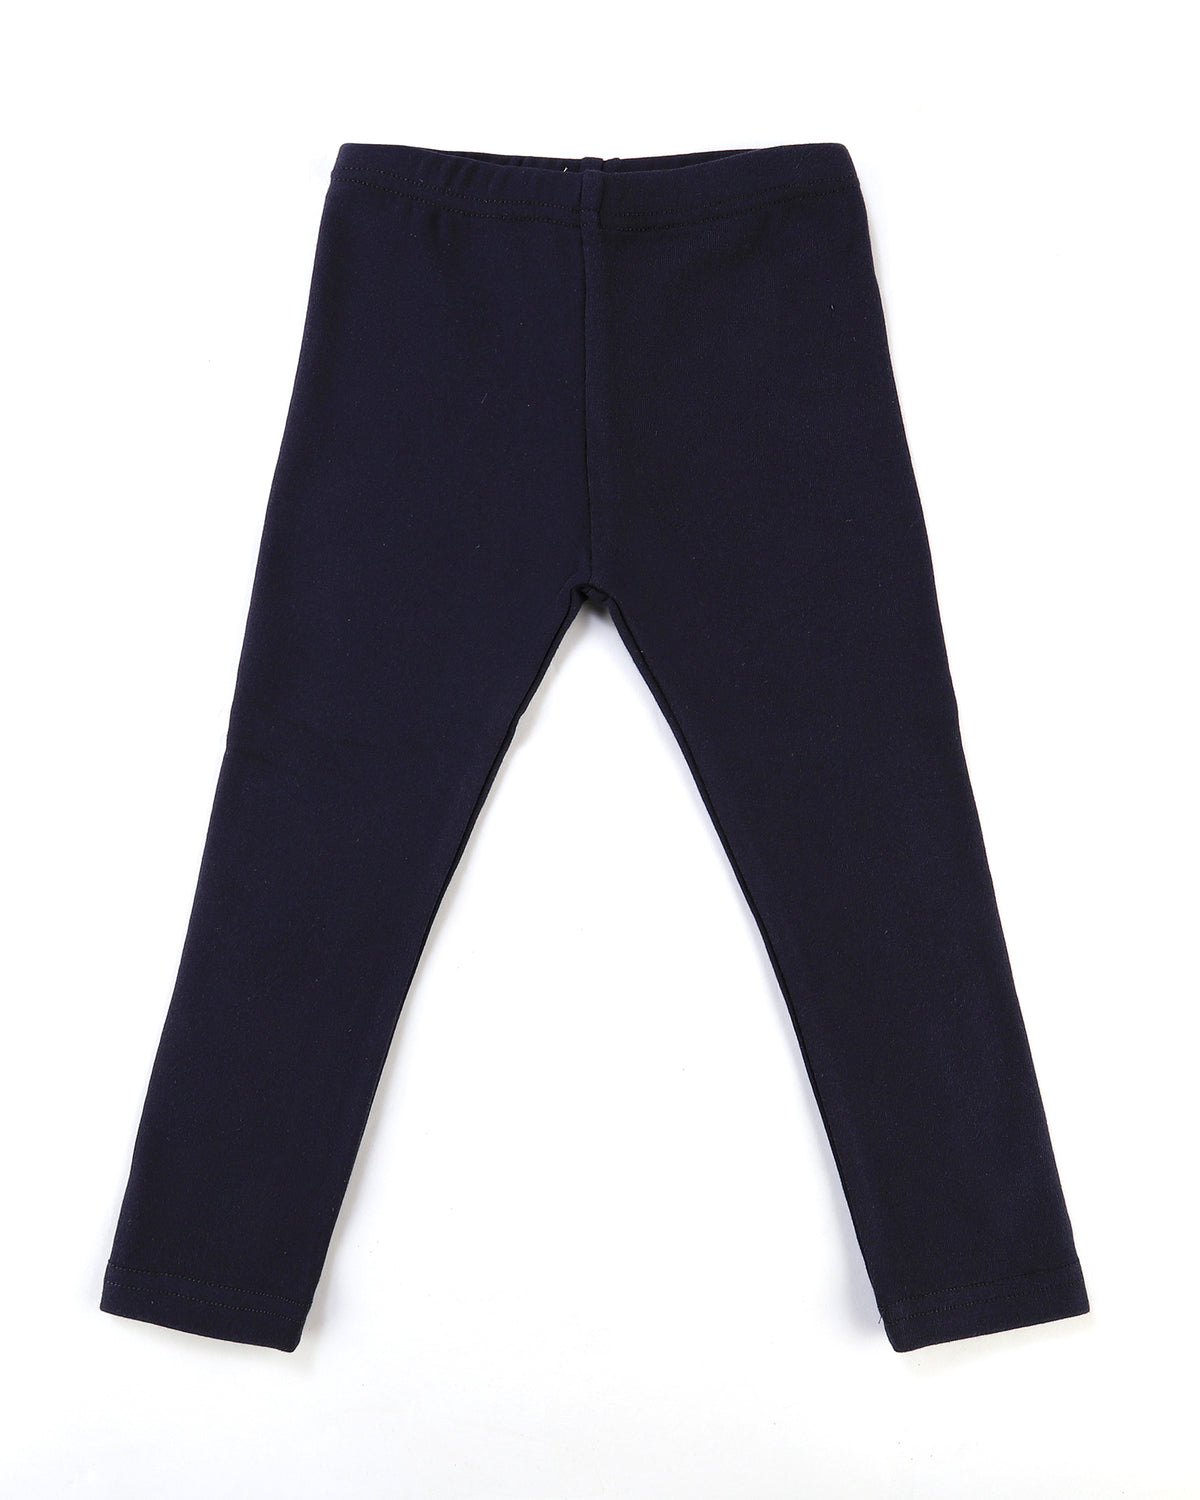 Here to stay Leggings In Navy Front